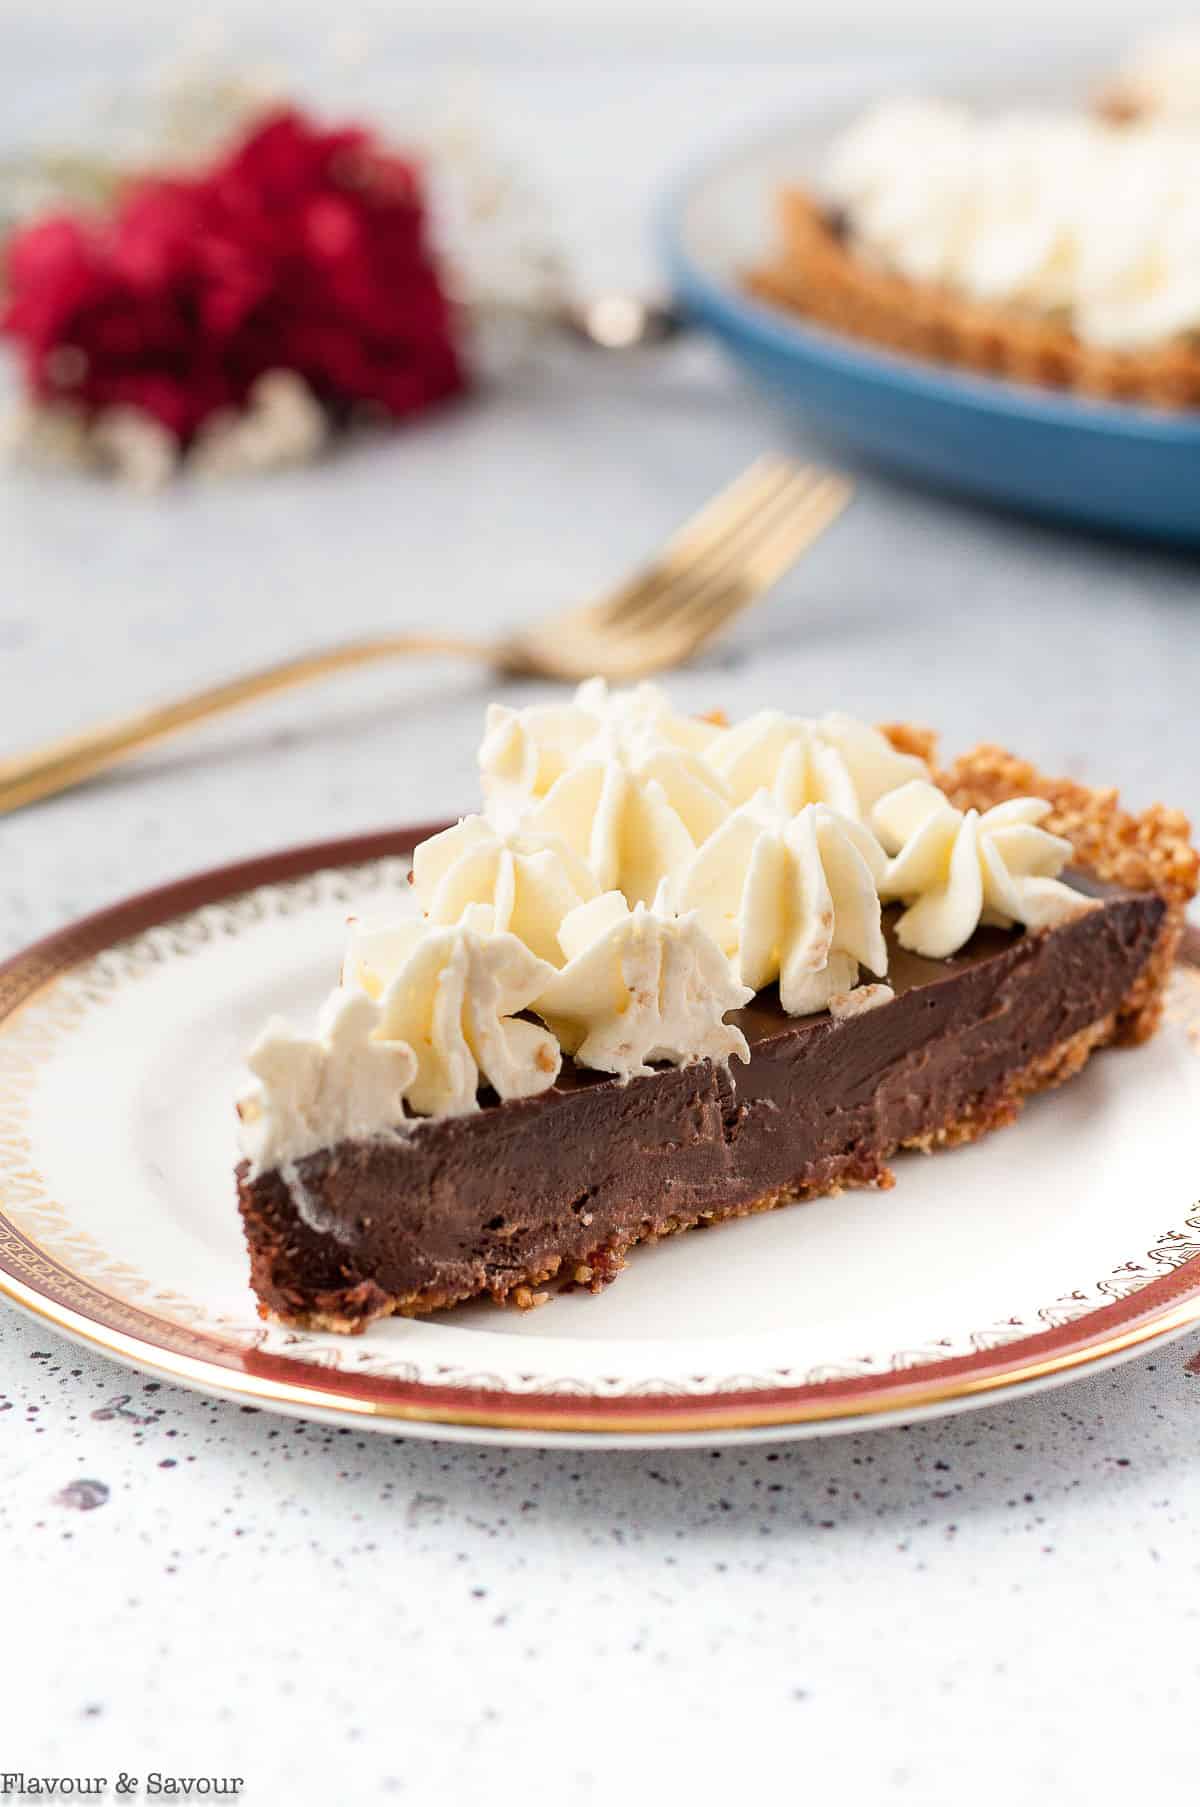 A slice of chocolate ganache tart with whipped cream on a plate.